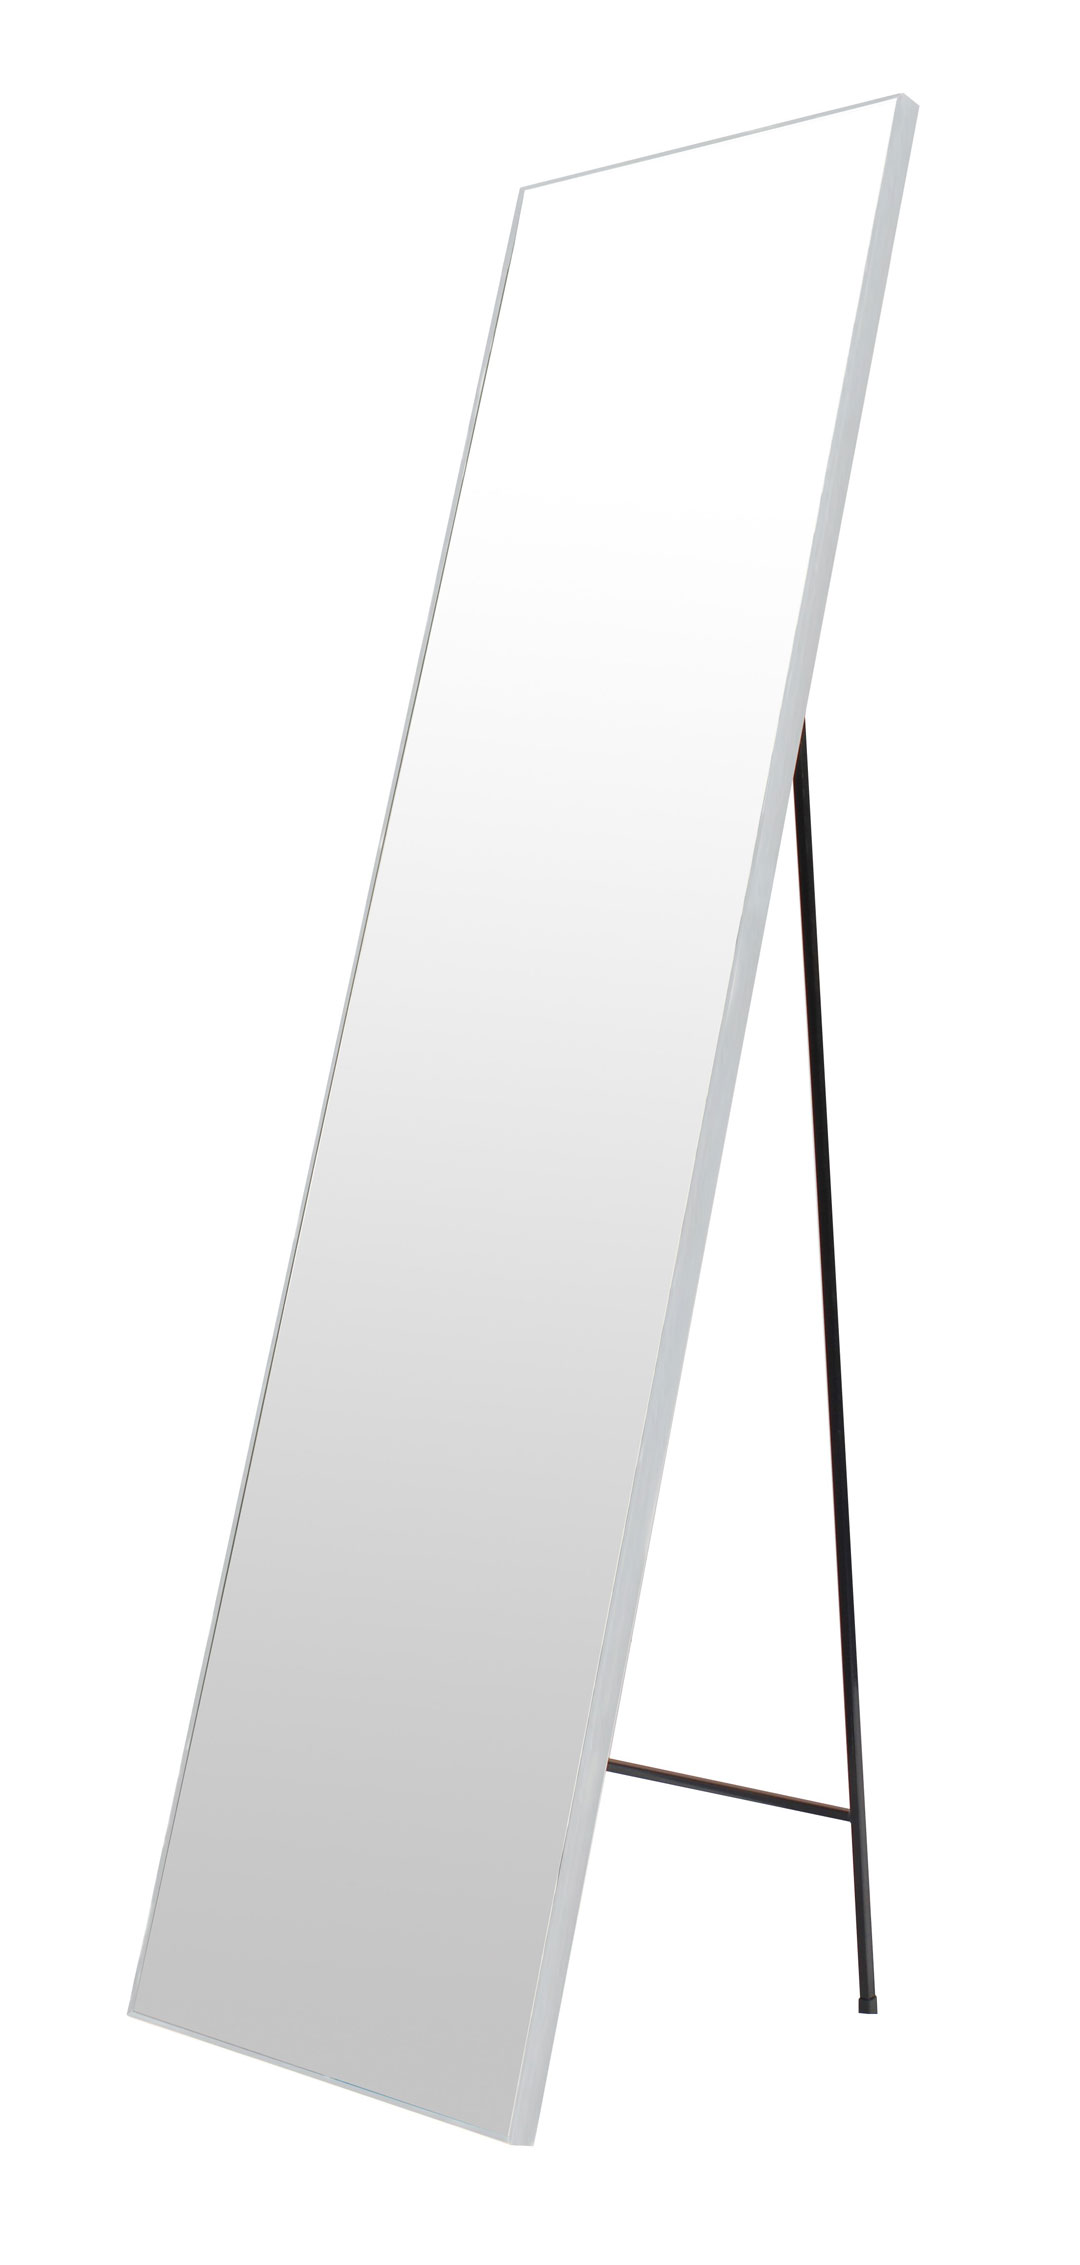 SUPERLIVING FULL BODY MIRROR WITH STAND 40X150CM - SILVER